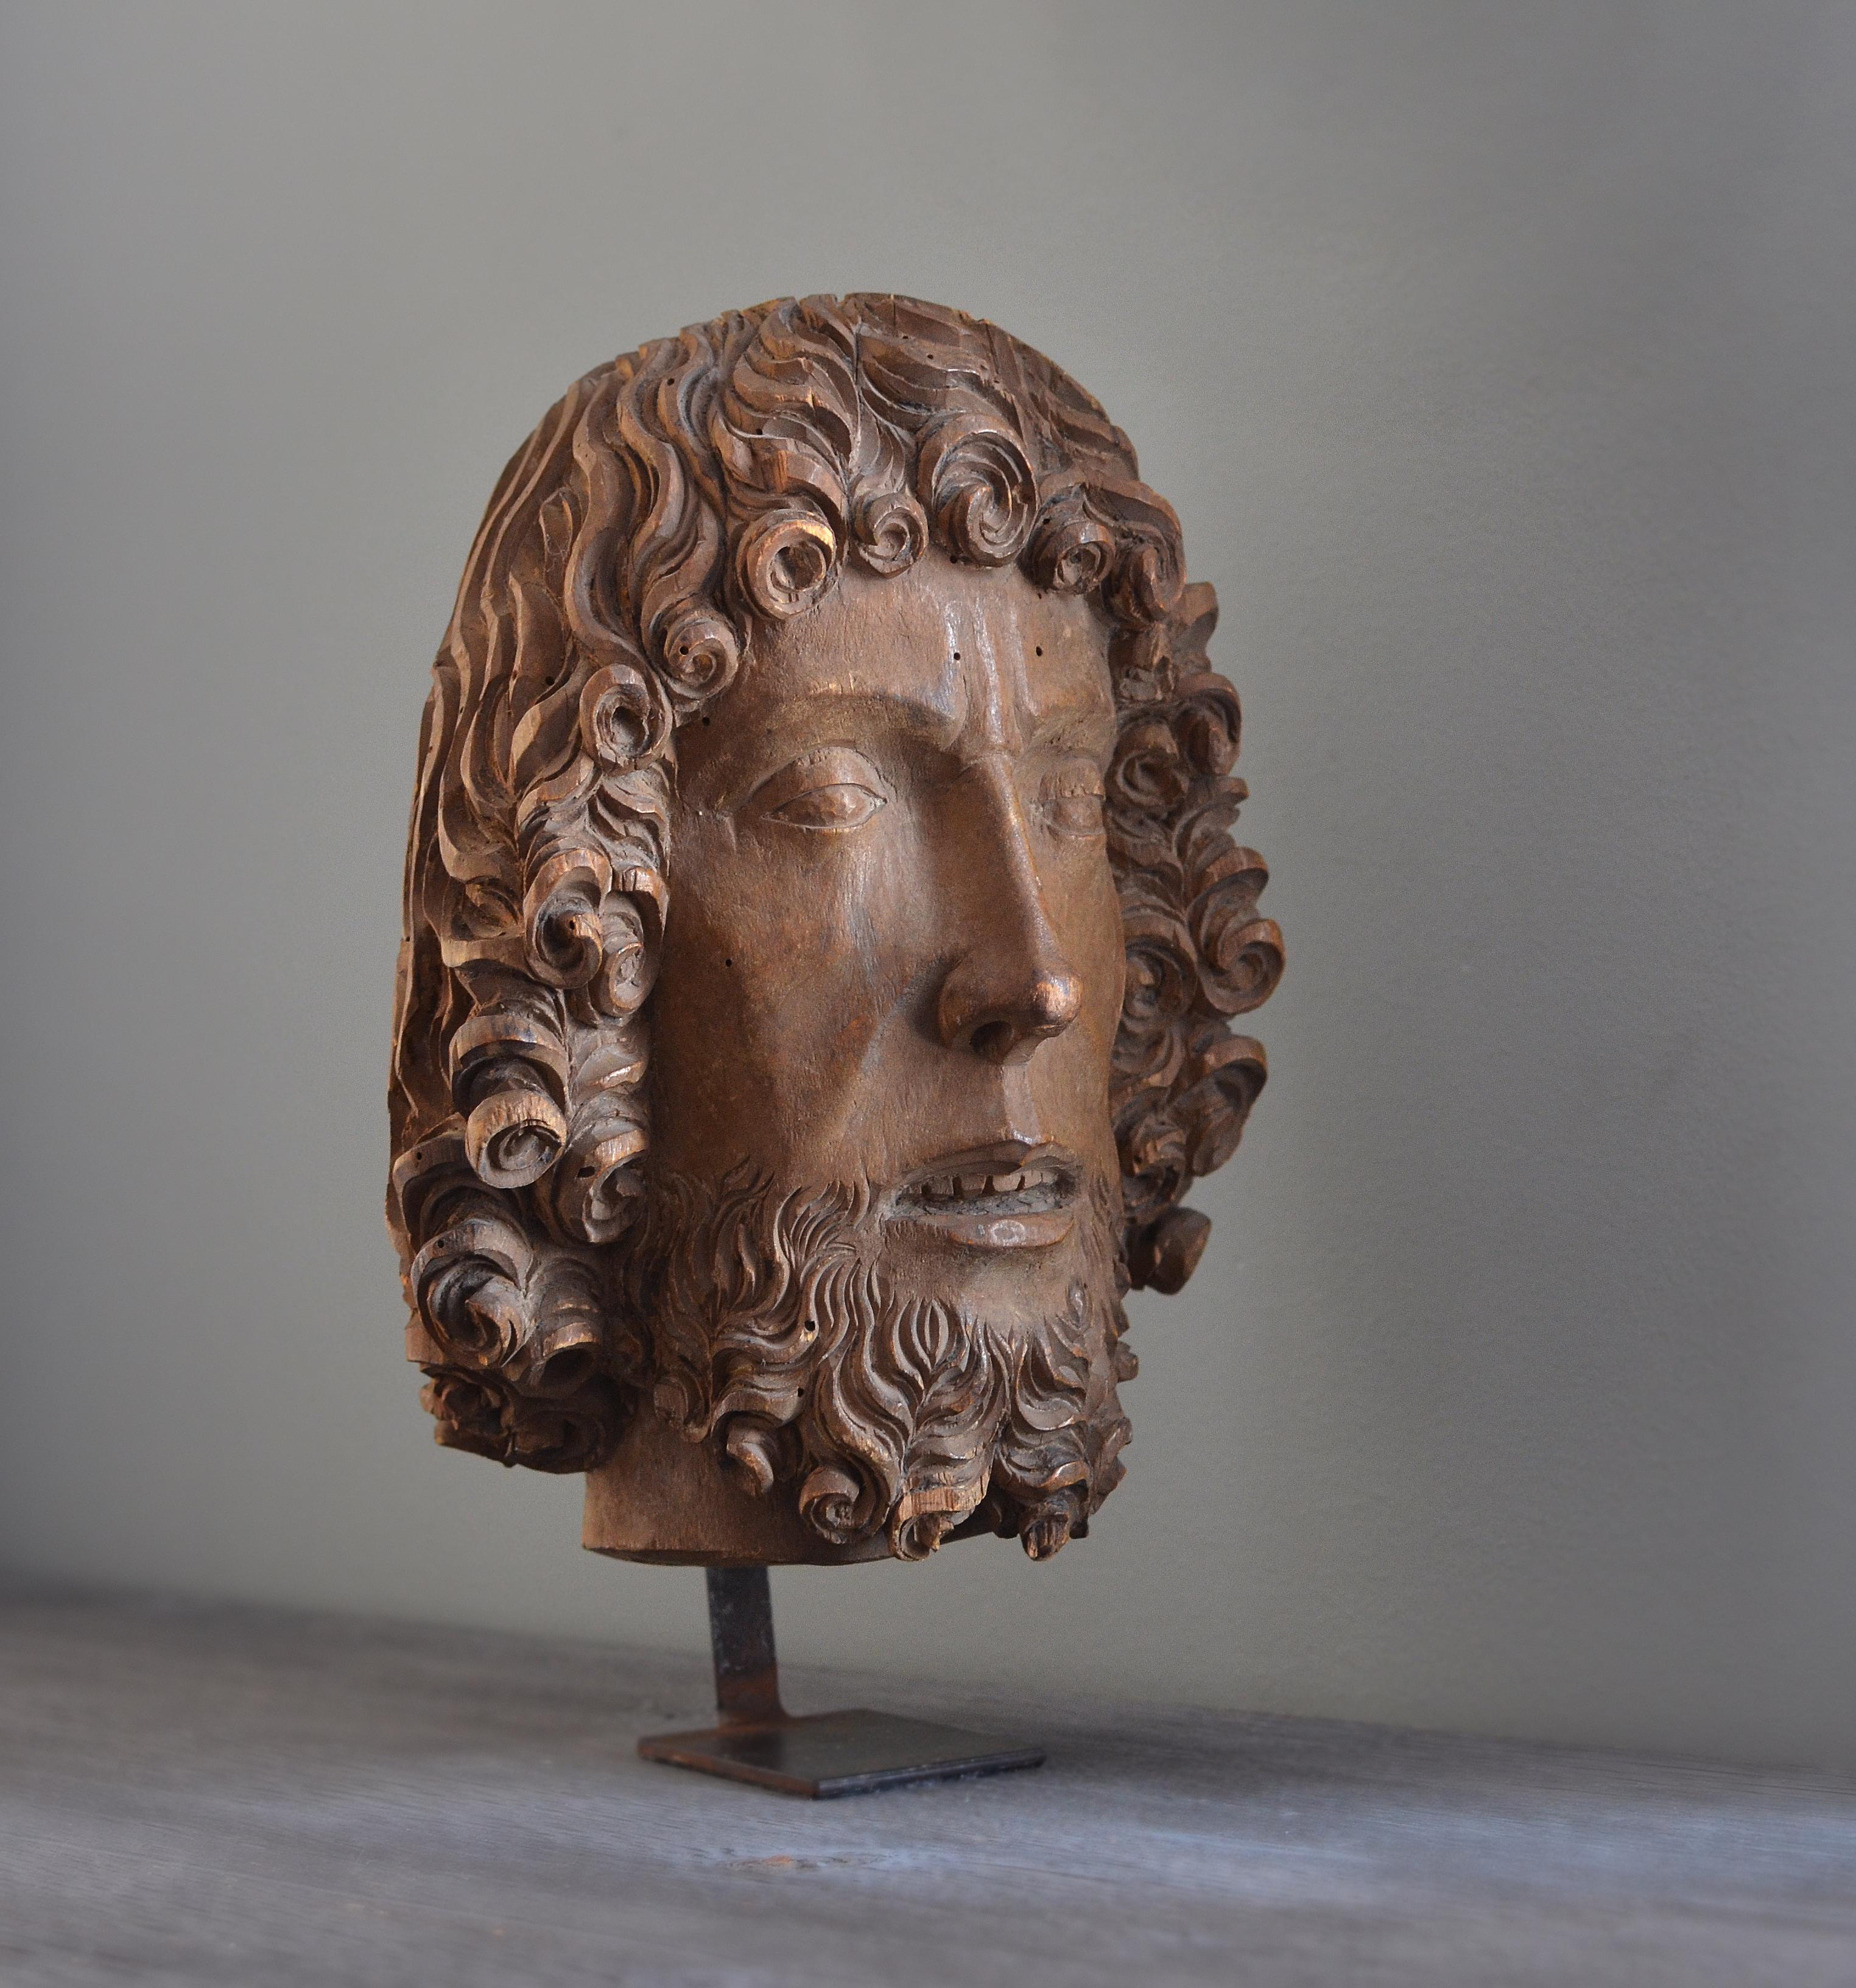 Carved 15th Century Wooden Bust of John the Baptist Attributed to Bernt Notke